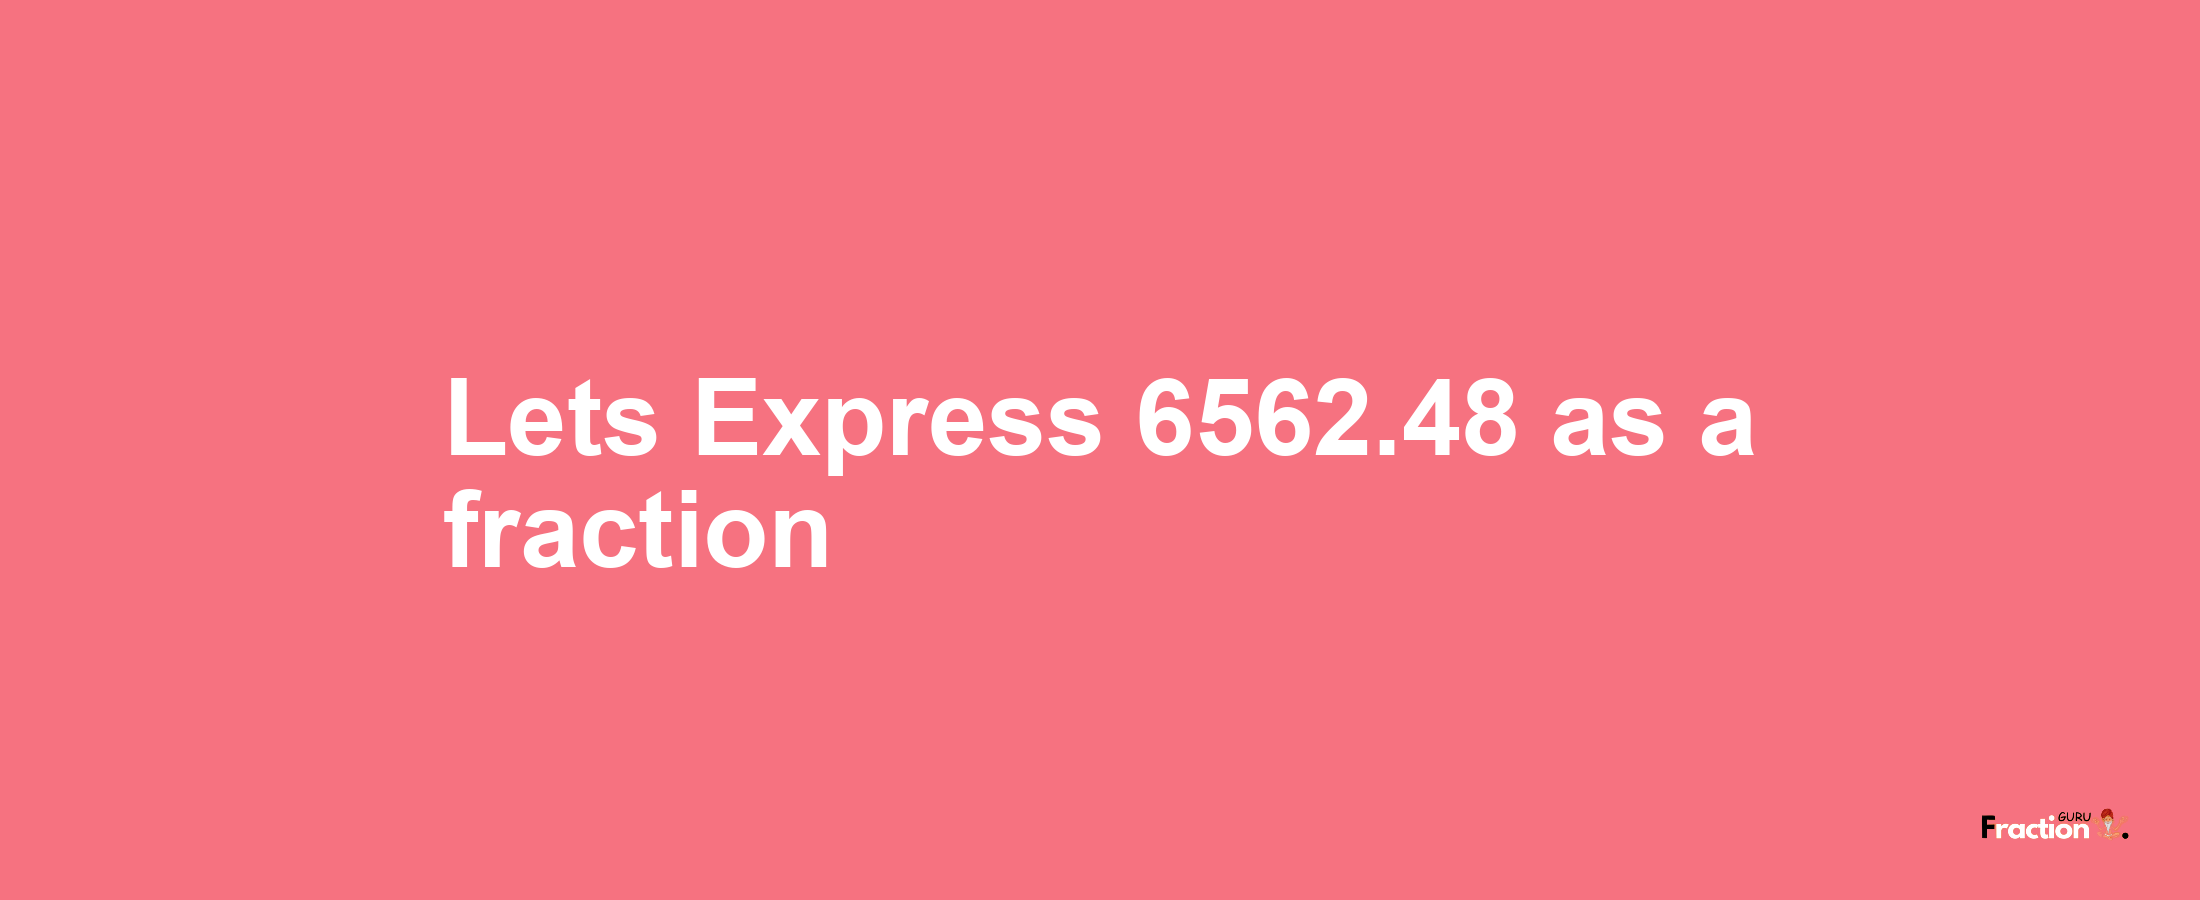 Lets Express 6562.48 as afraction